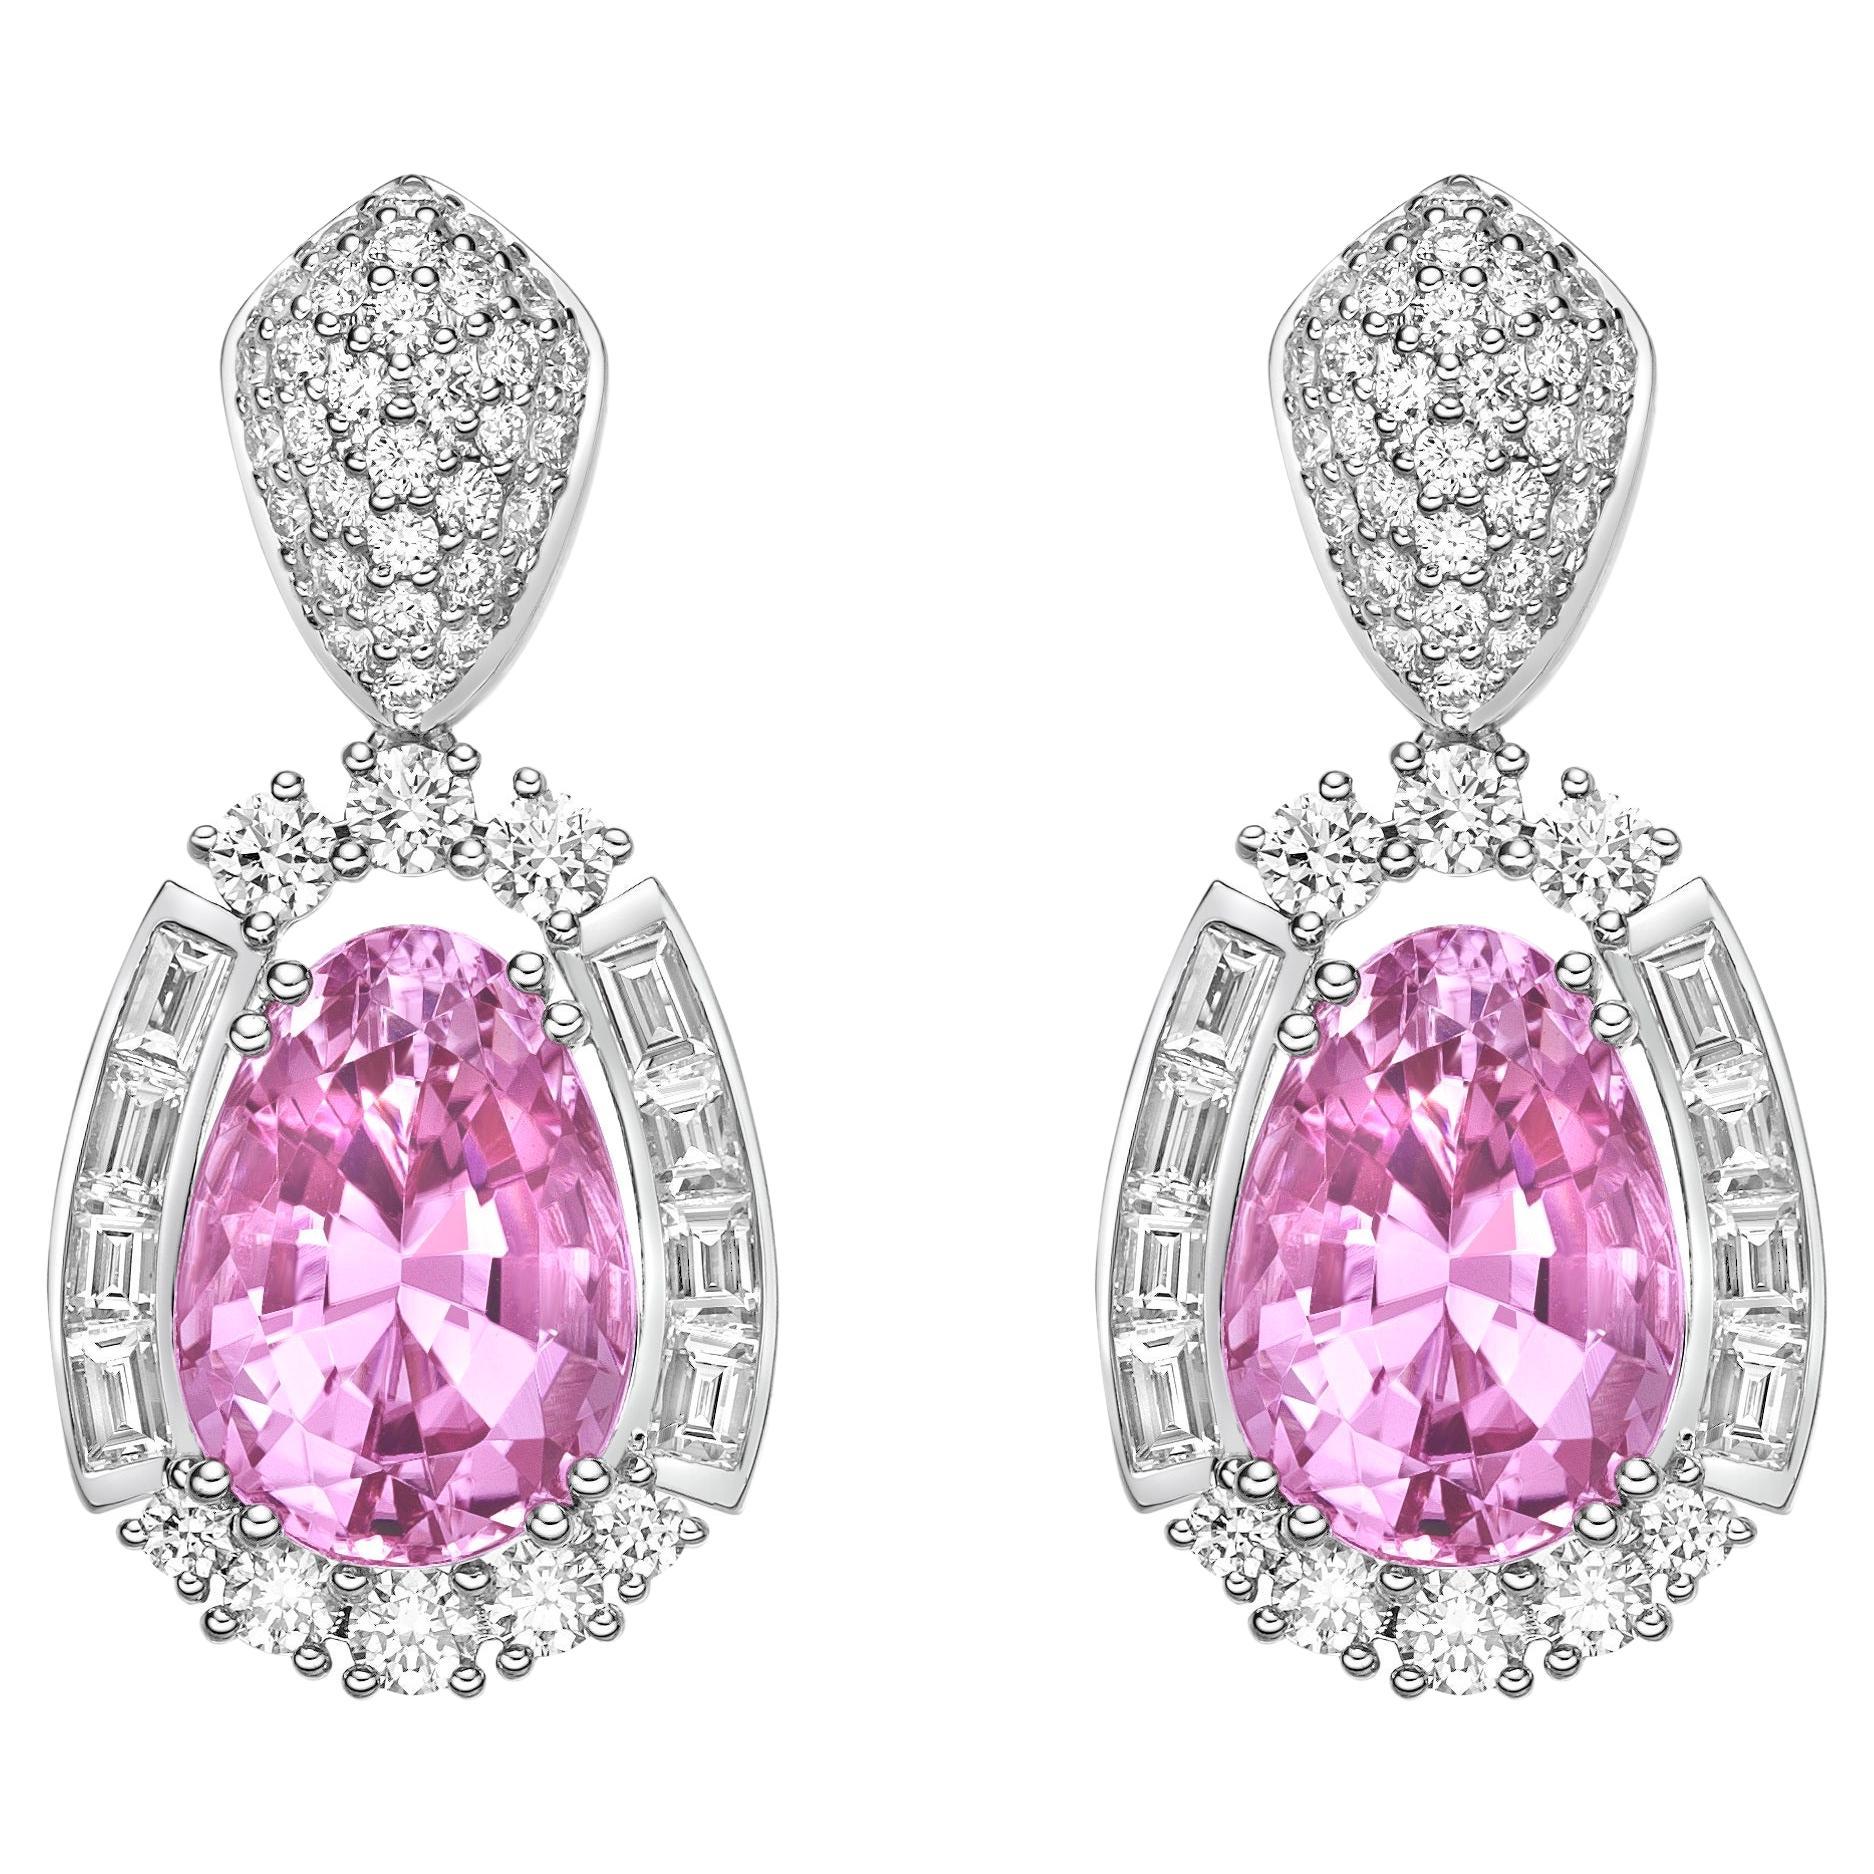 11.19 Carat Pink Tourmaline Drop Earrings in 18Karat White Gold with Diamond. For Sale